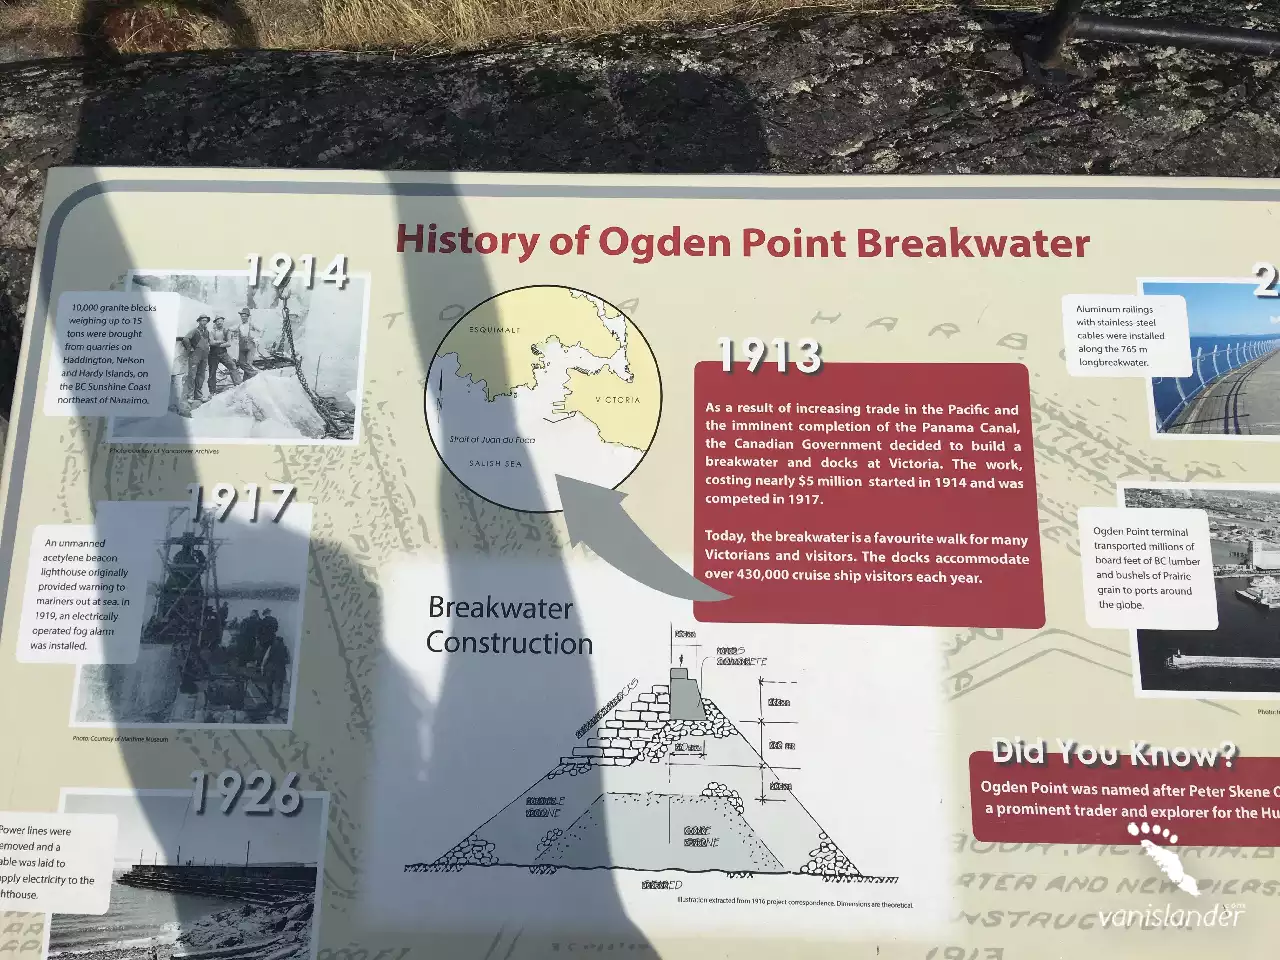 History Board of Ogden Point Breakwater - Victoria,  Vancouver Island